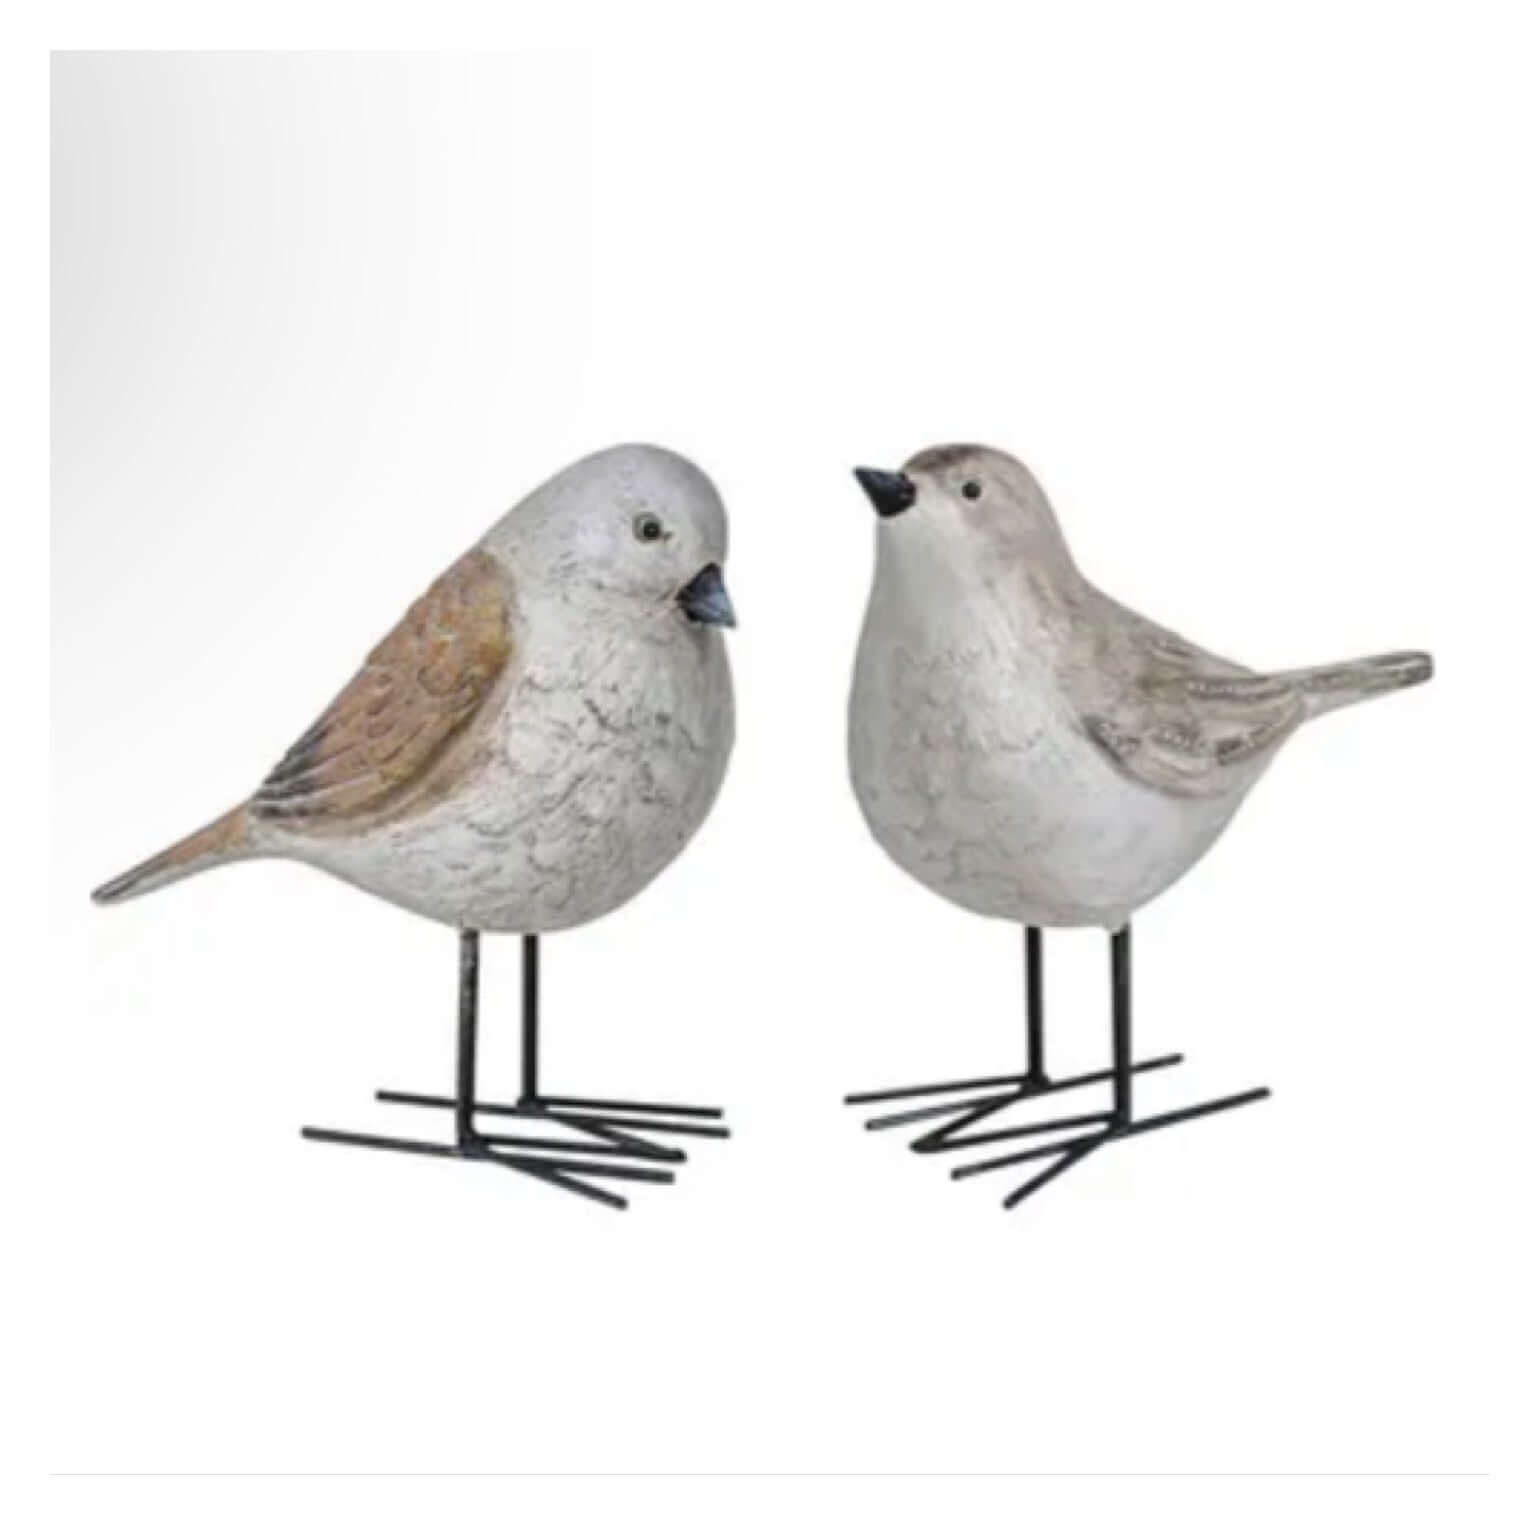 Bird Natural Set of 2 Nature Ornament - The Renmy Store Homewares & Gifts 